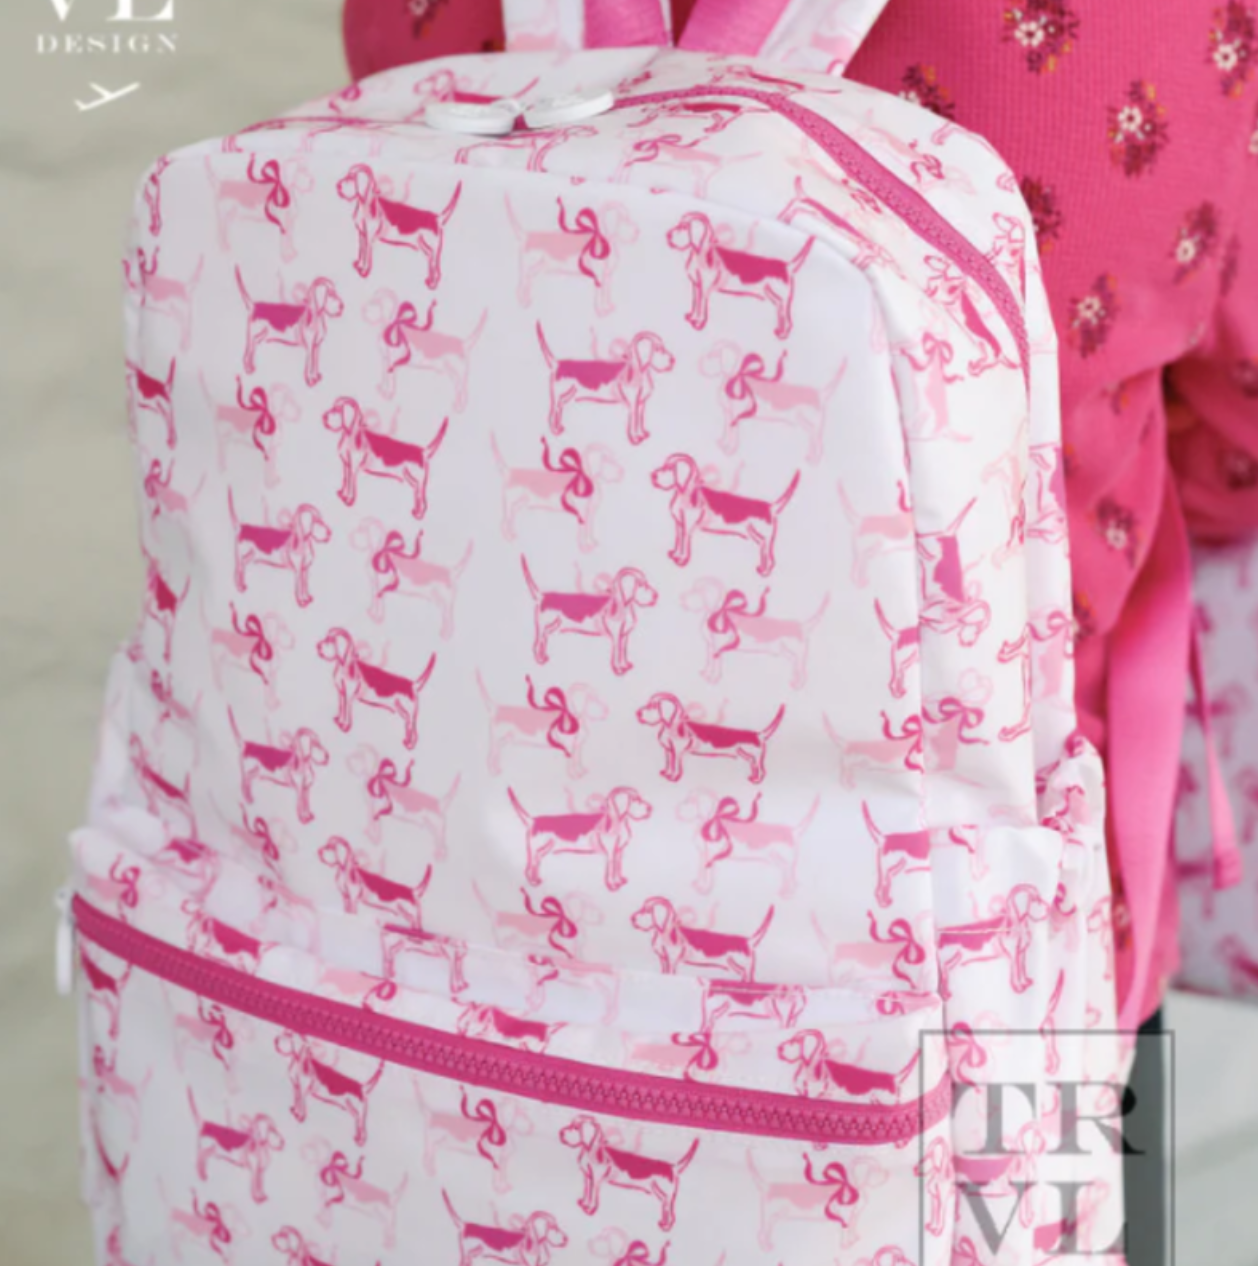 BACKPACKER- Puppy Love Pink